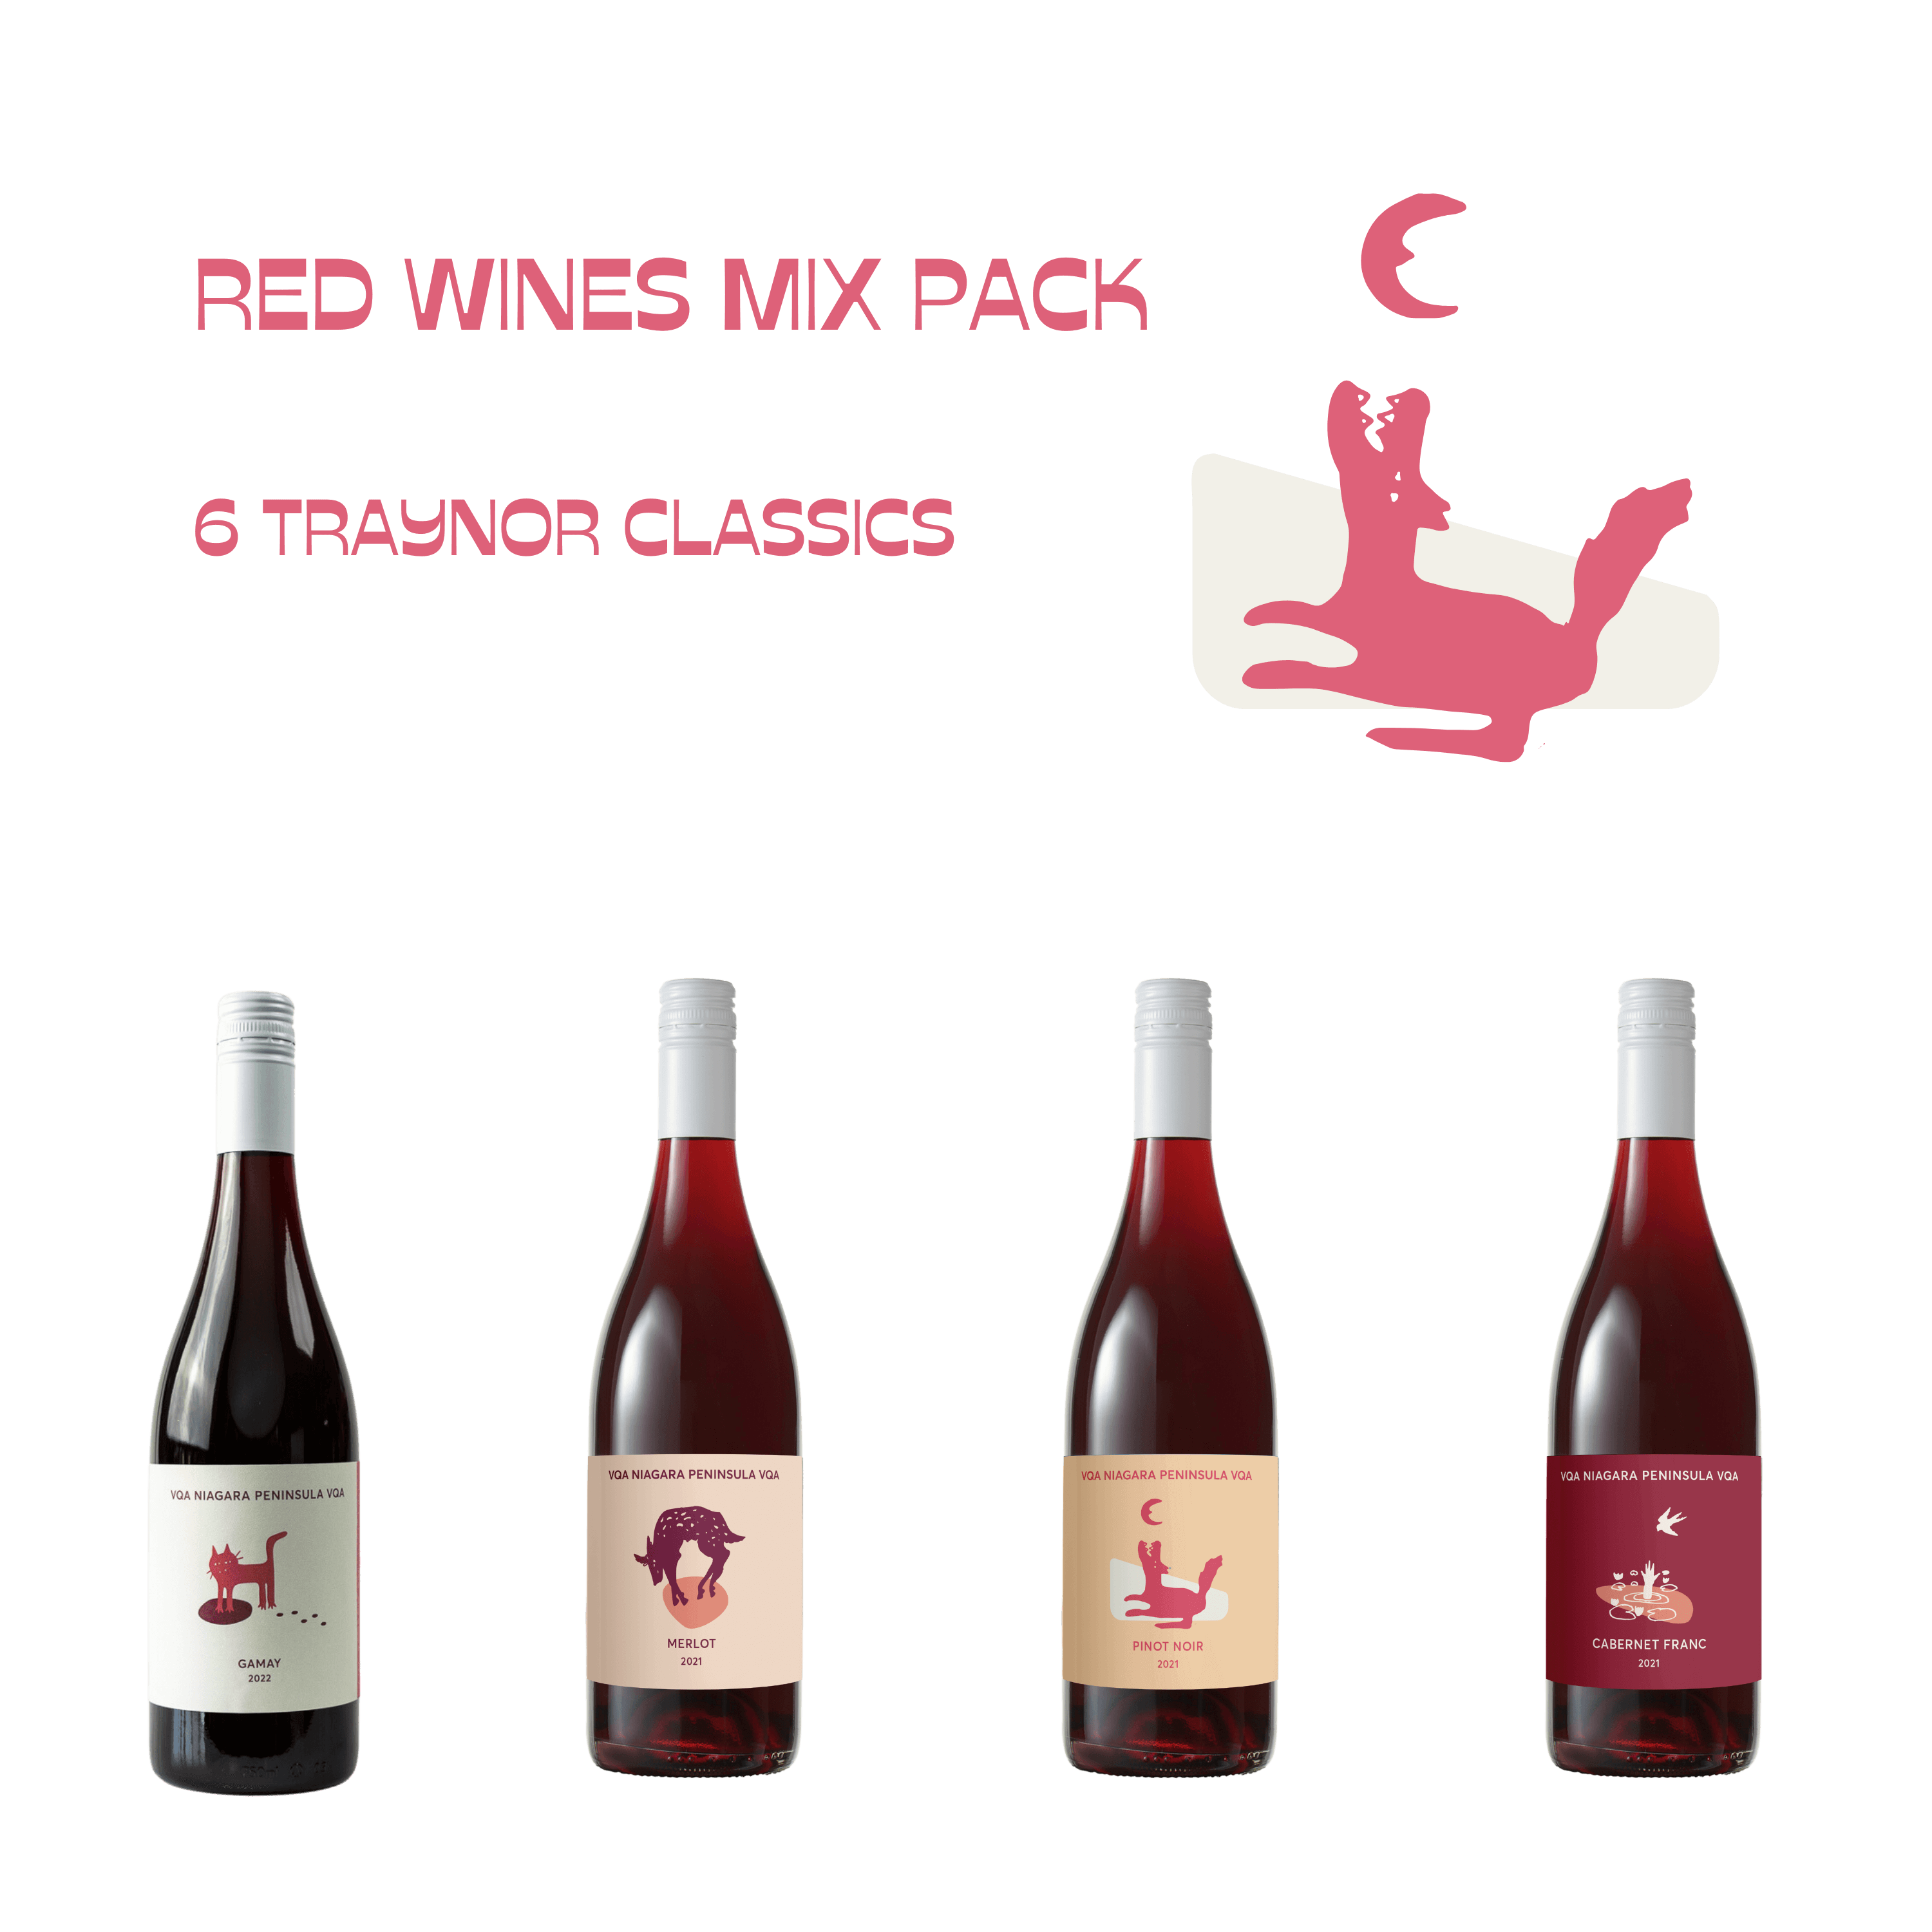 Red Wines mix pack